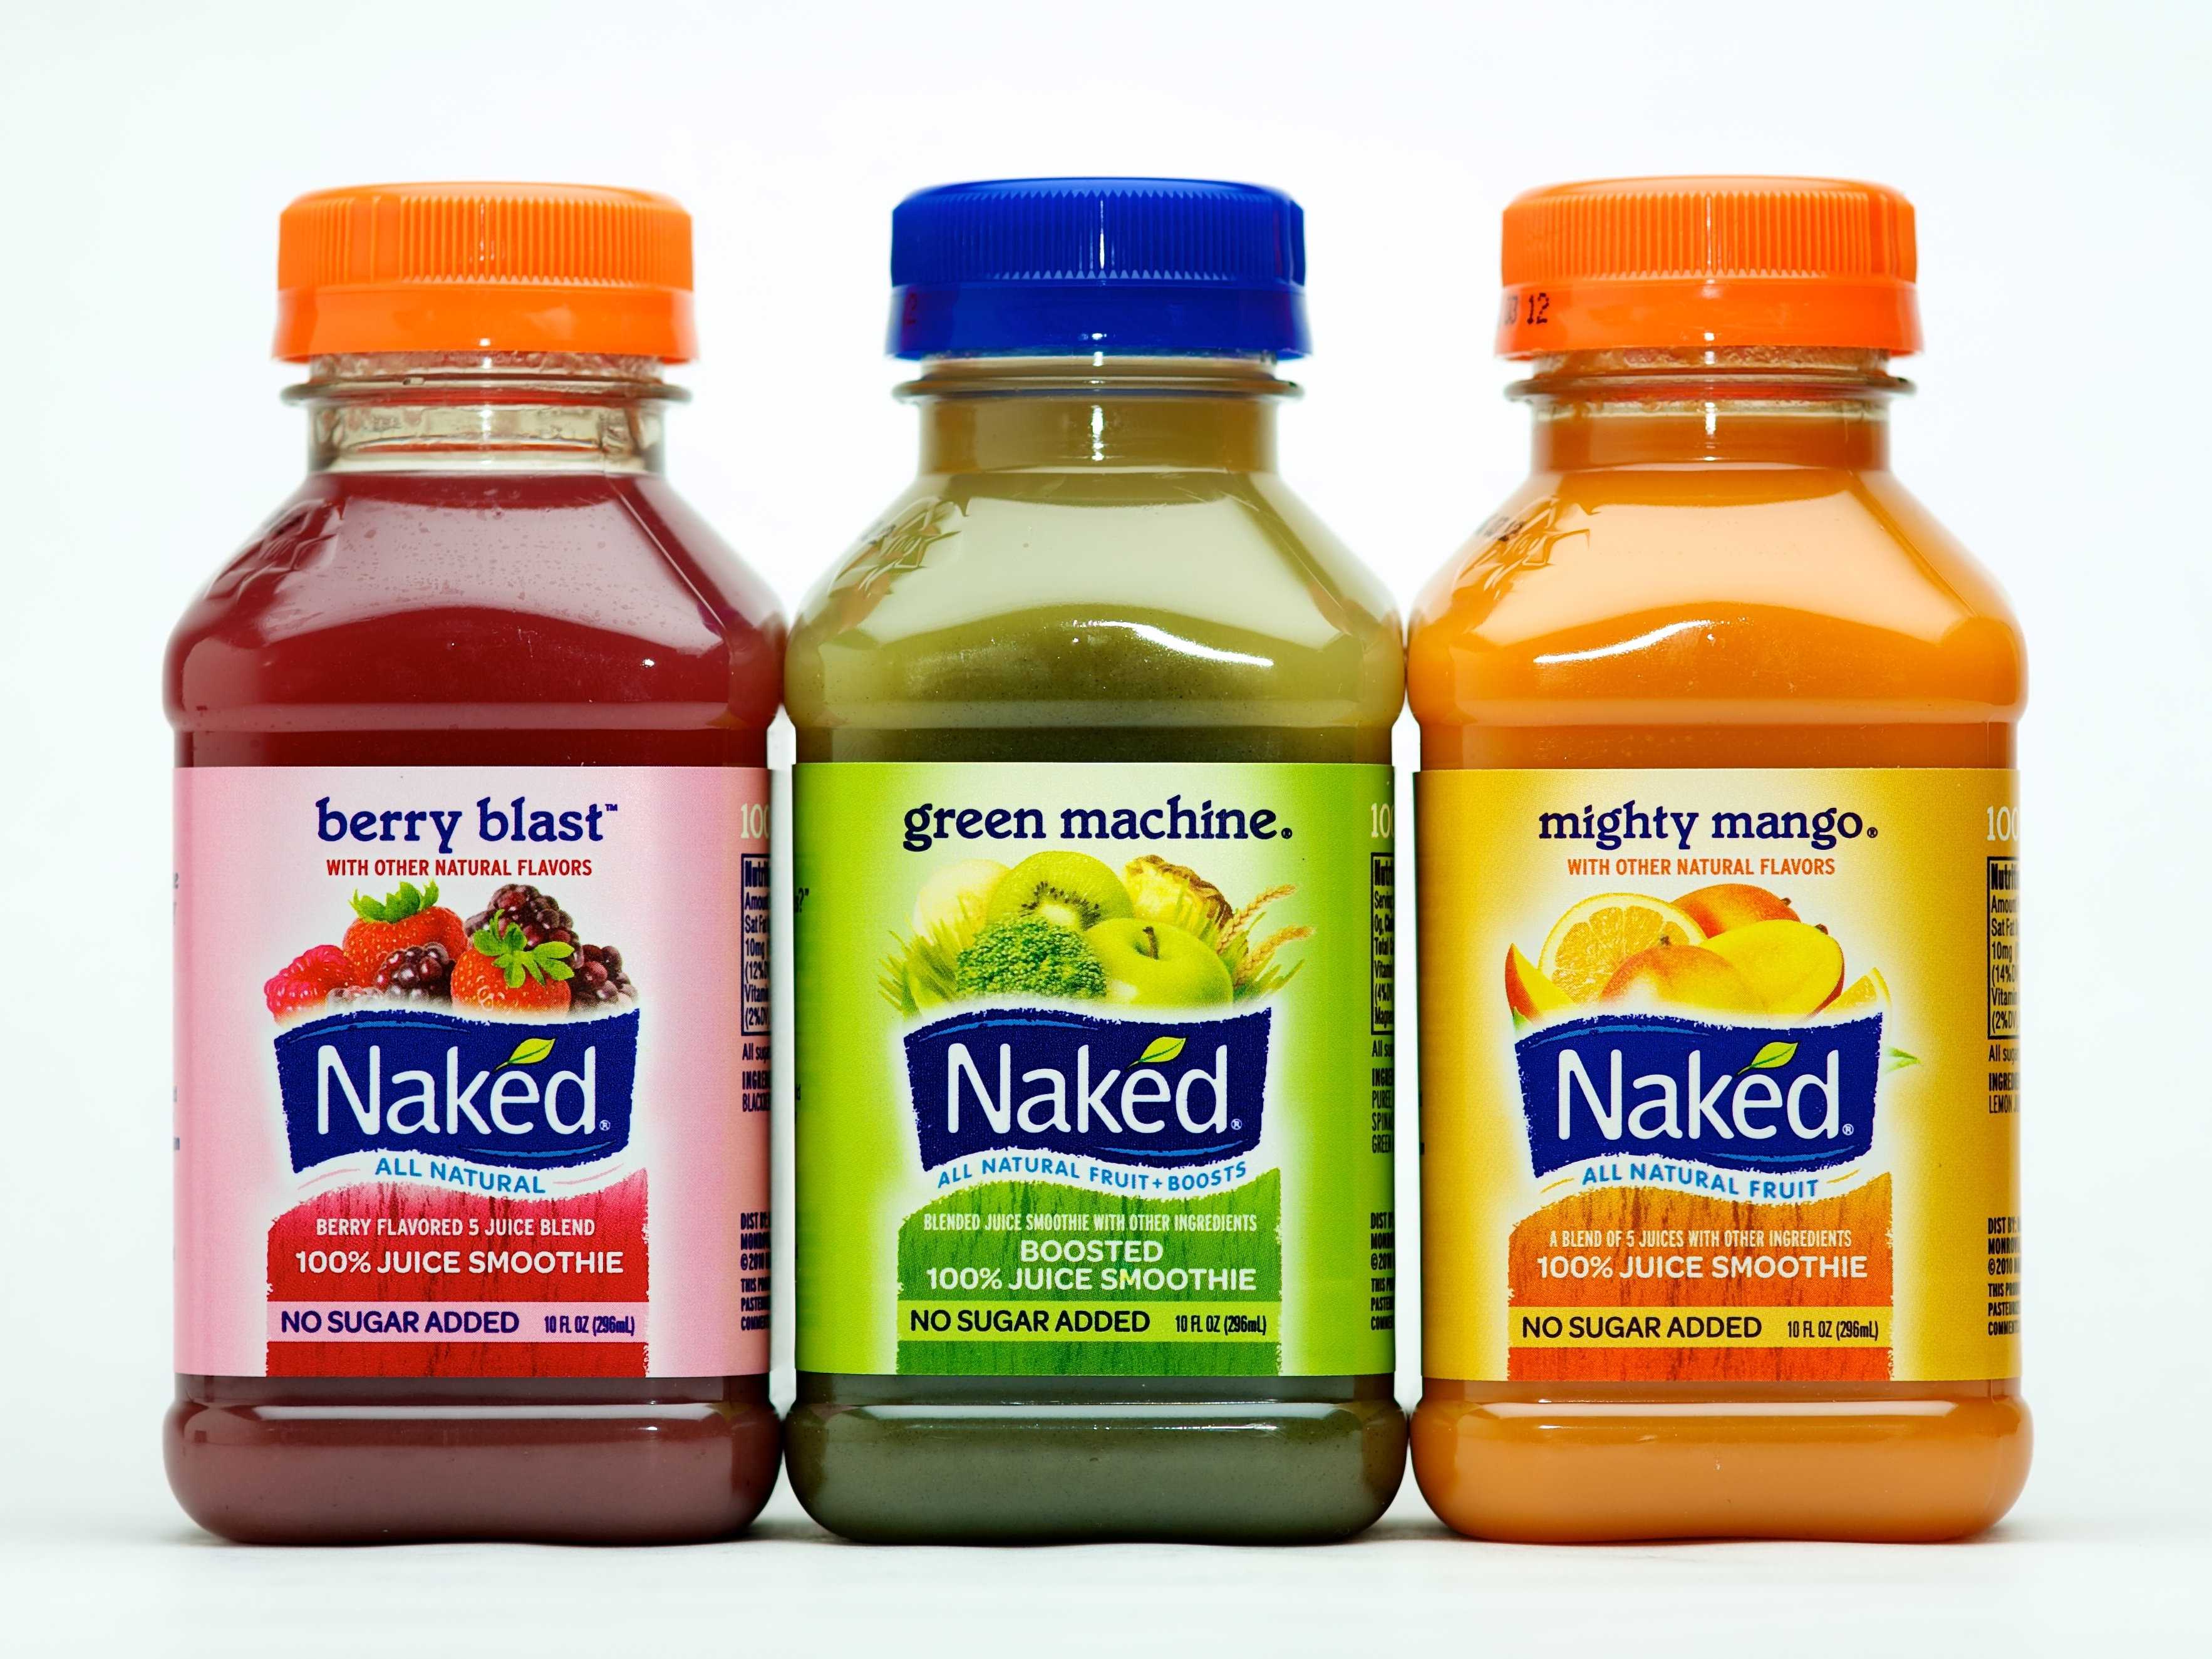 pepsis-naked-juice-agrees-to-pay-in-lawsuit-over-all-natural-labels.jpg